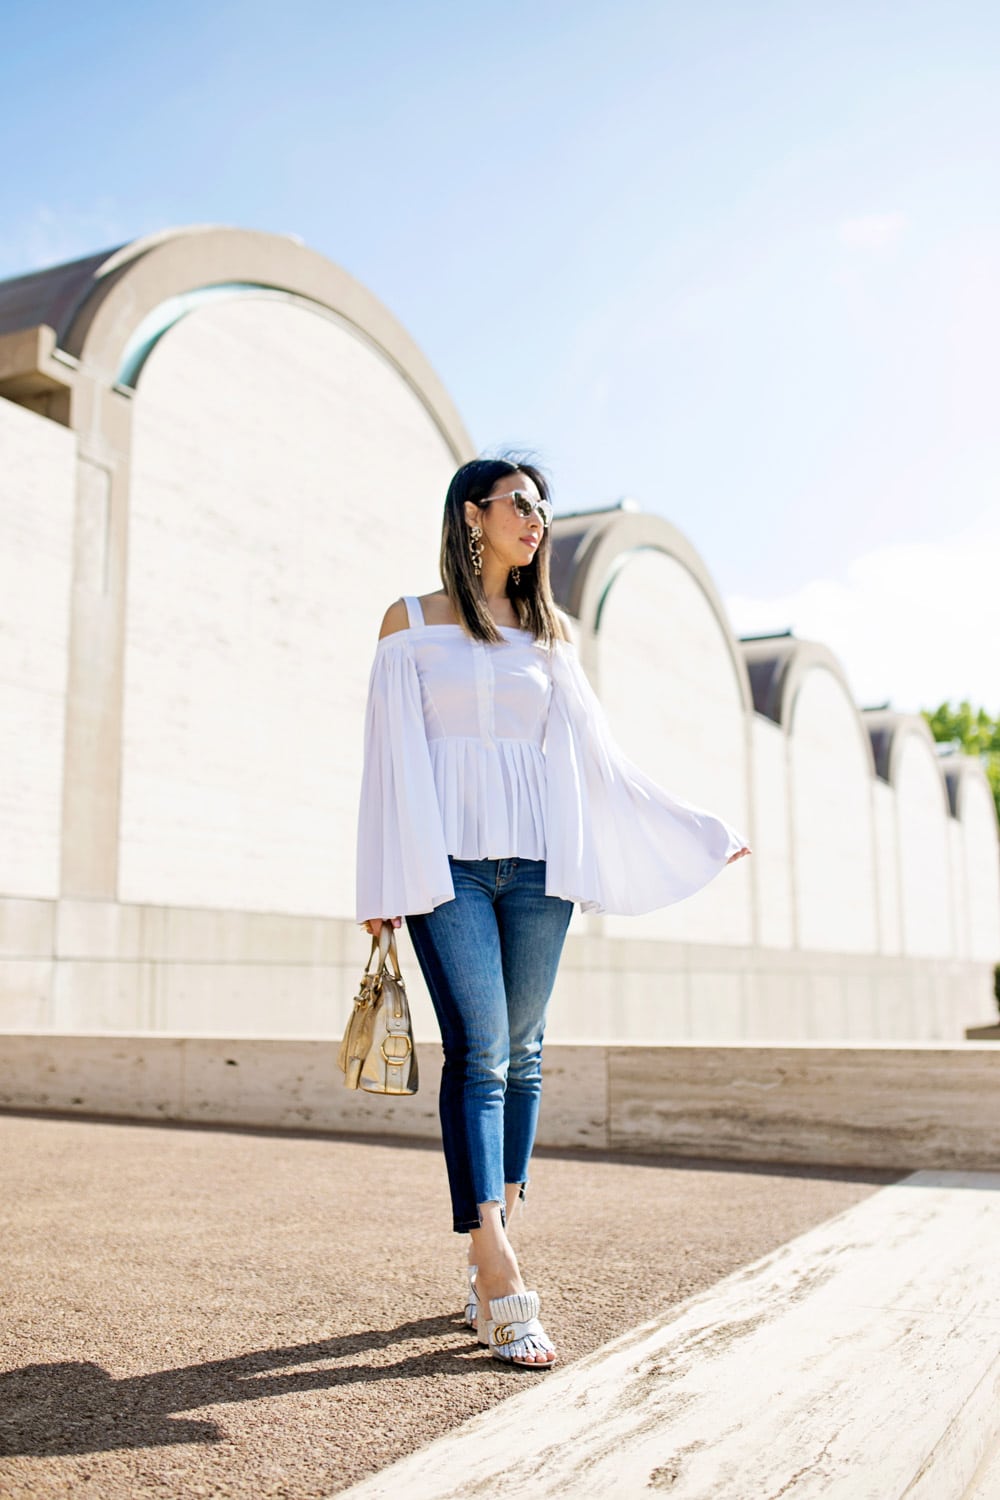 charles youssef pleated off the shoulder top with lele sadoughi windchime earrings and whbm tuxedo jeans, gucci marmont silver loafers, ysl mini muse gold